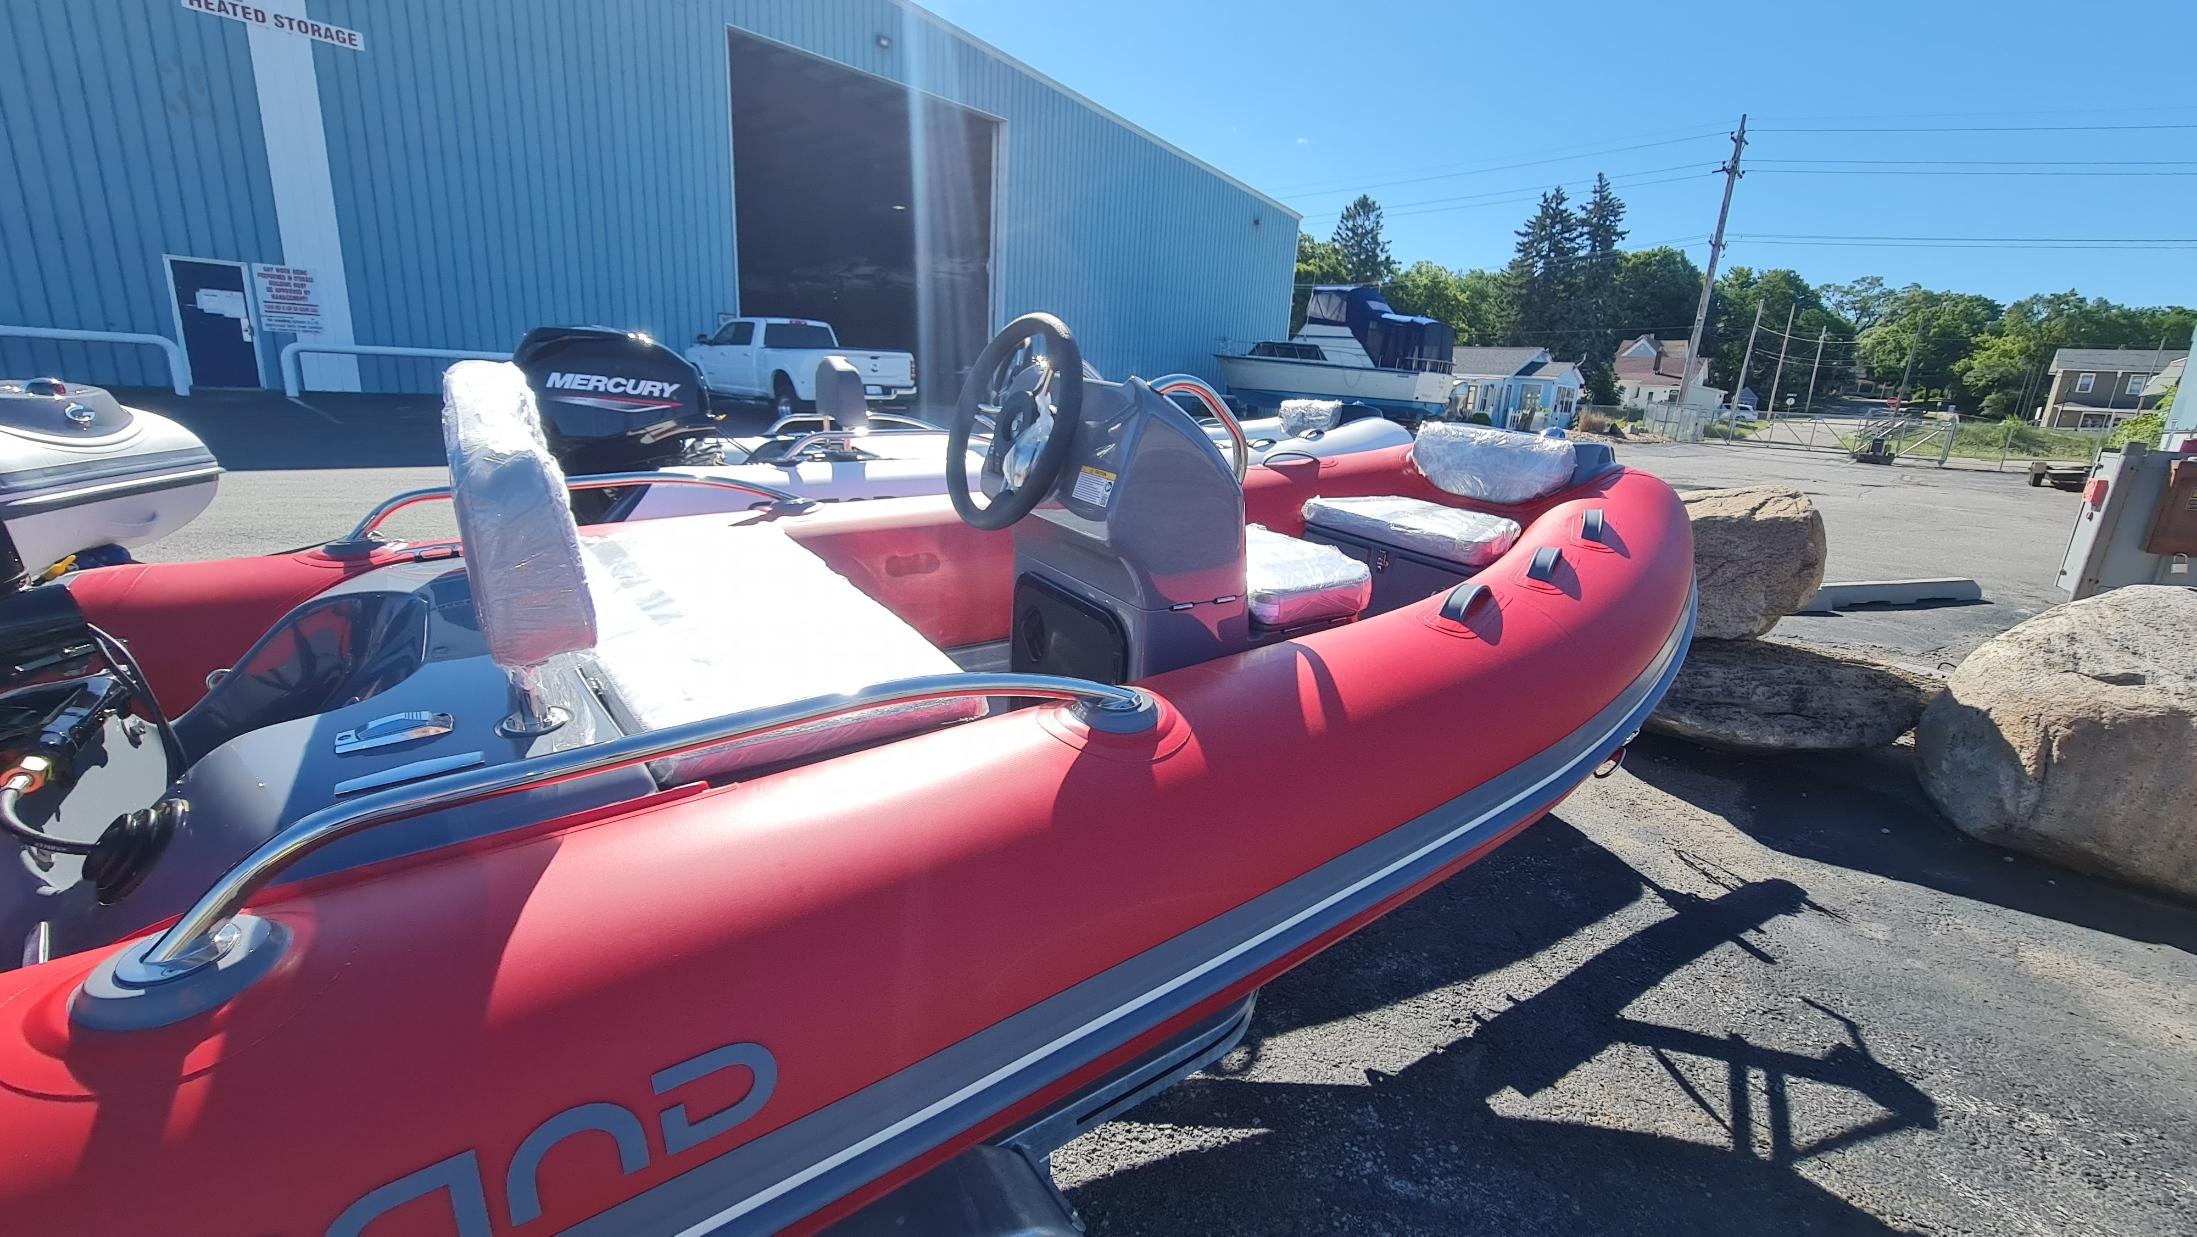 2023 Grand Inflatables G380EF